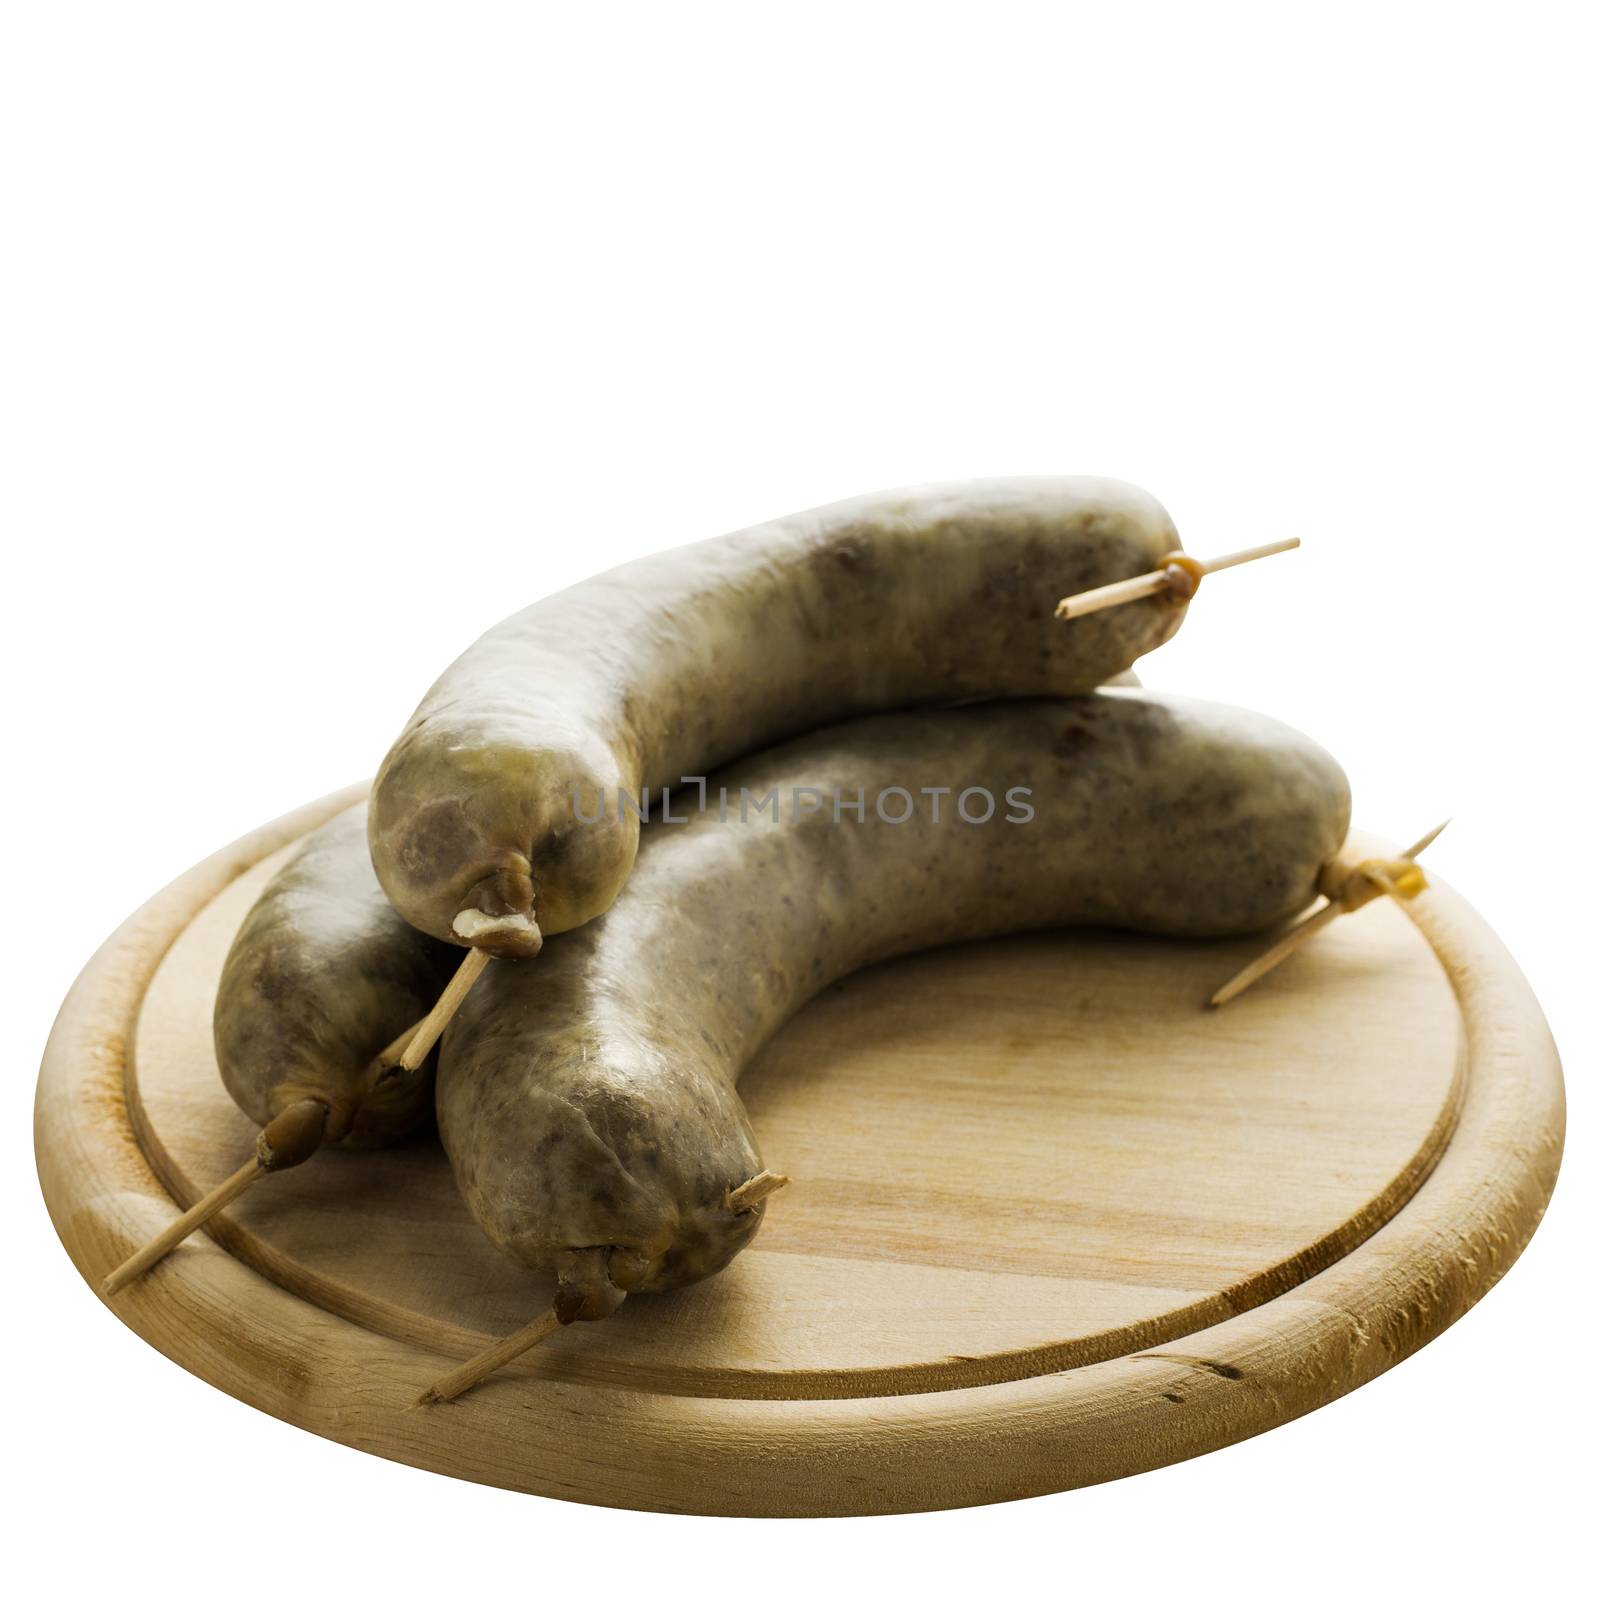 Tripe sausages served on a wooden board, isolated